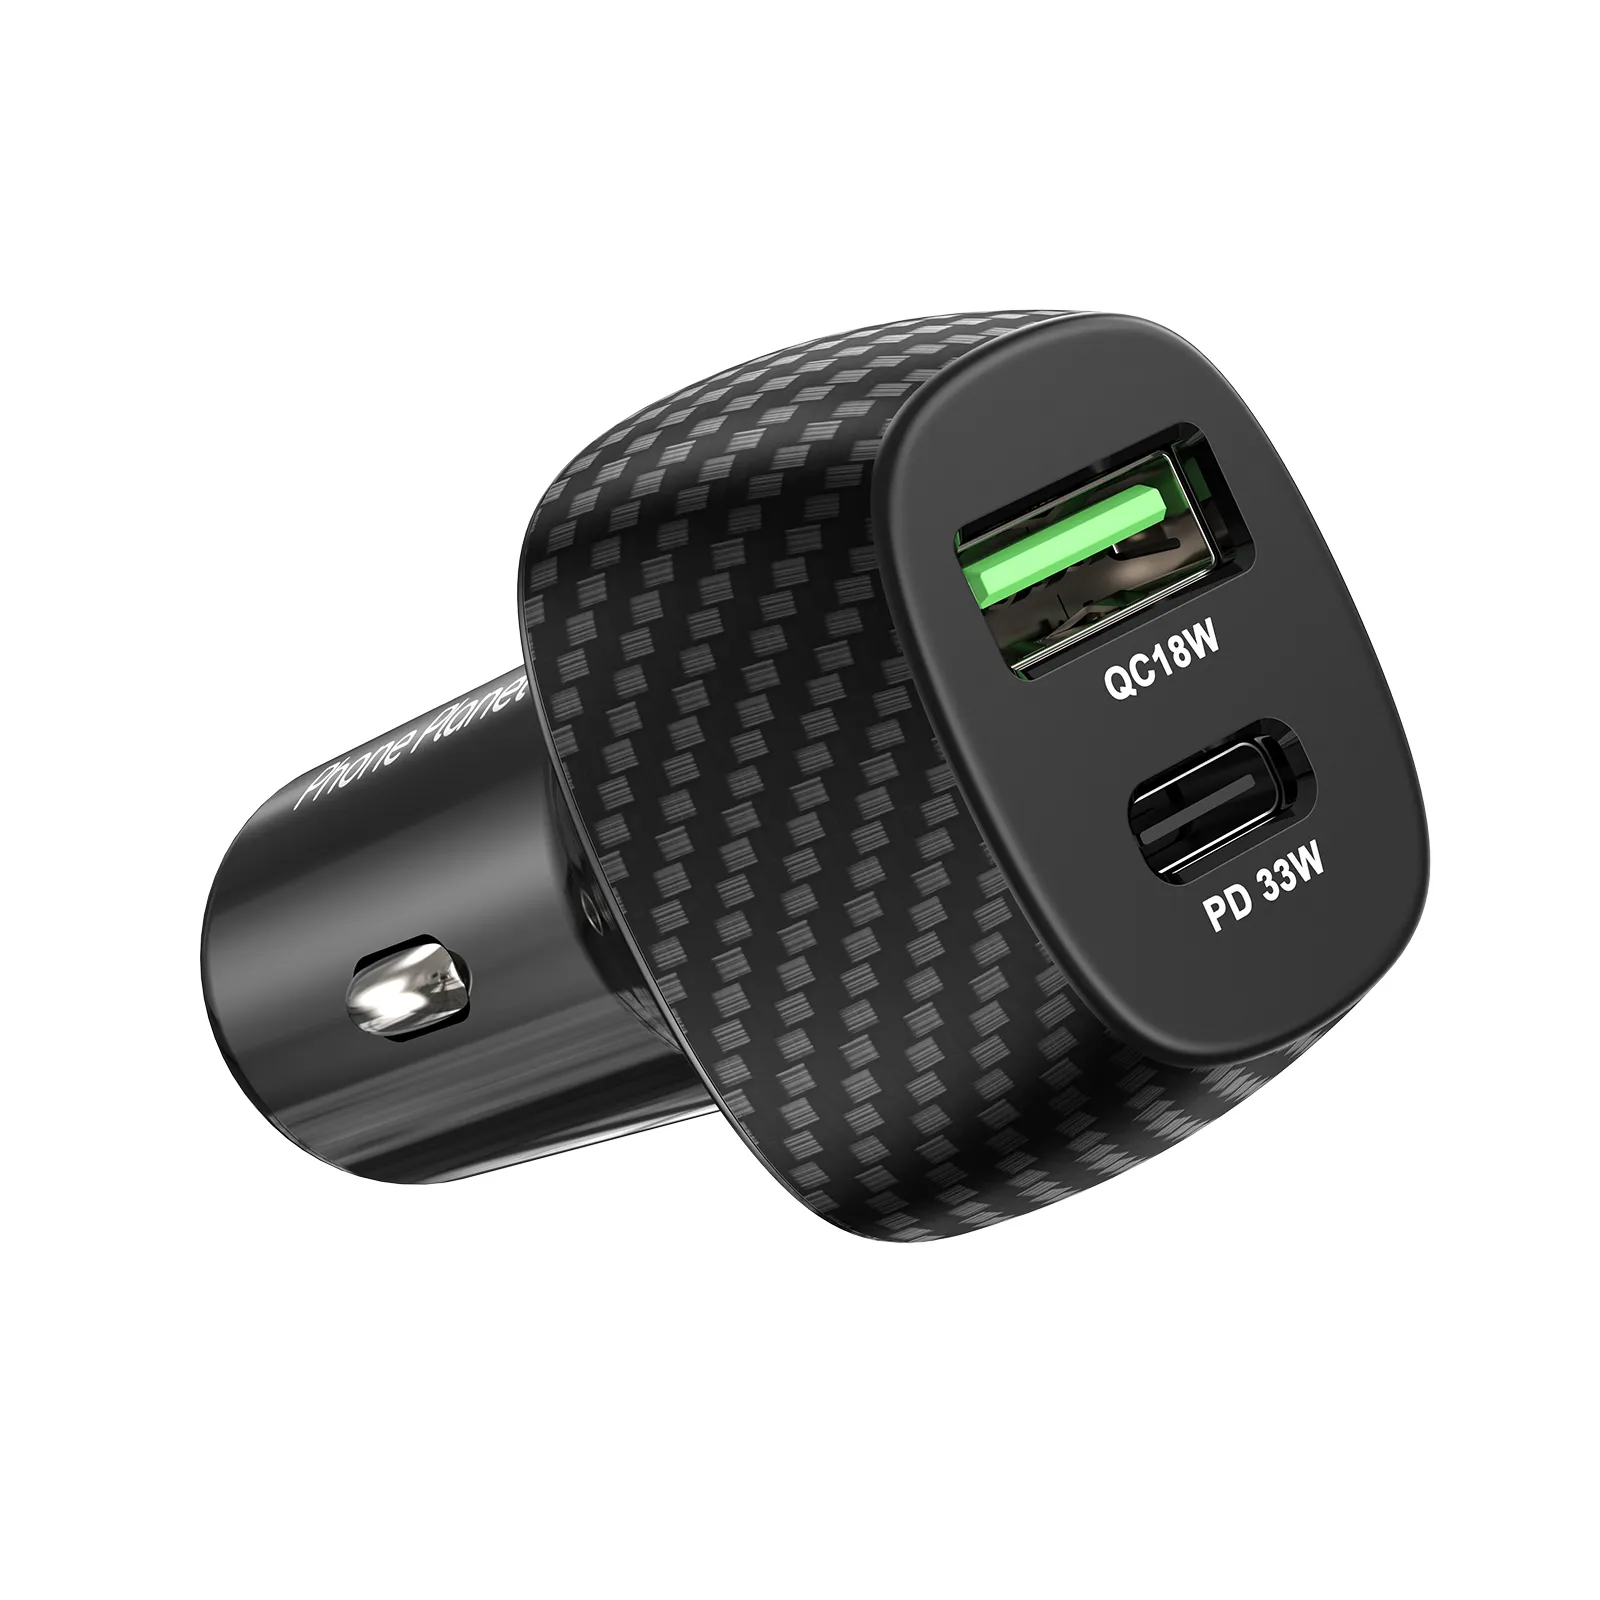 Phone Planet Consumer electronic car accessories 51w car charger fast charging PD QC car phone charger